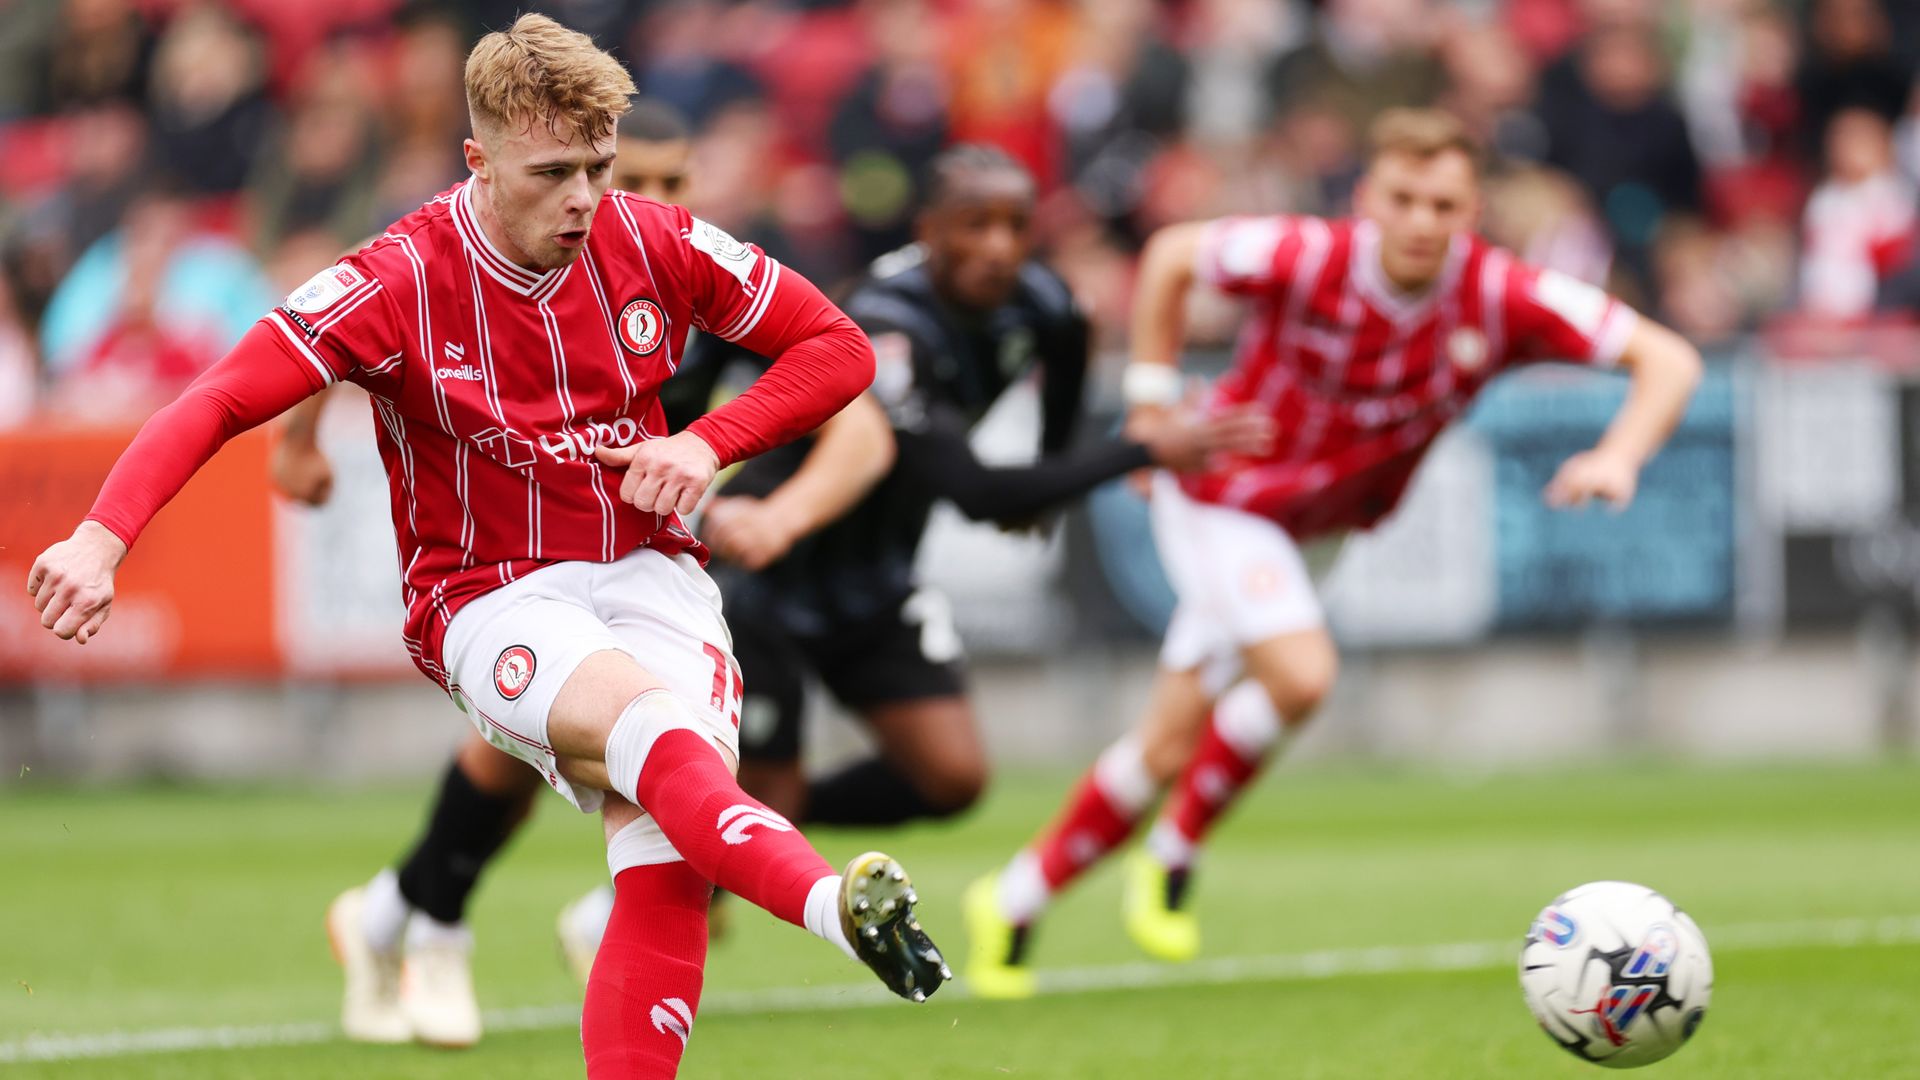 Bristol City seal comfortable win over Rotherham